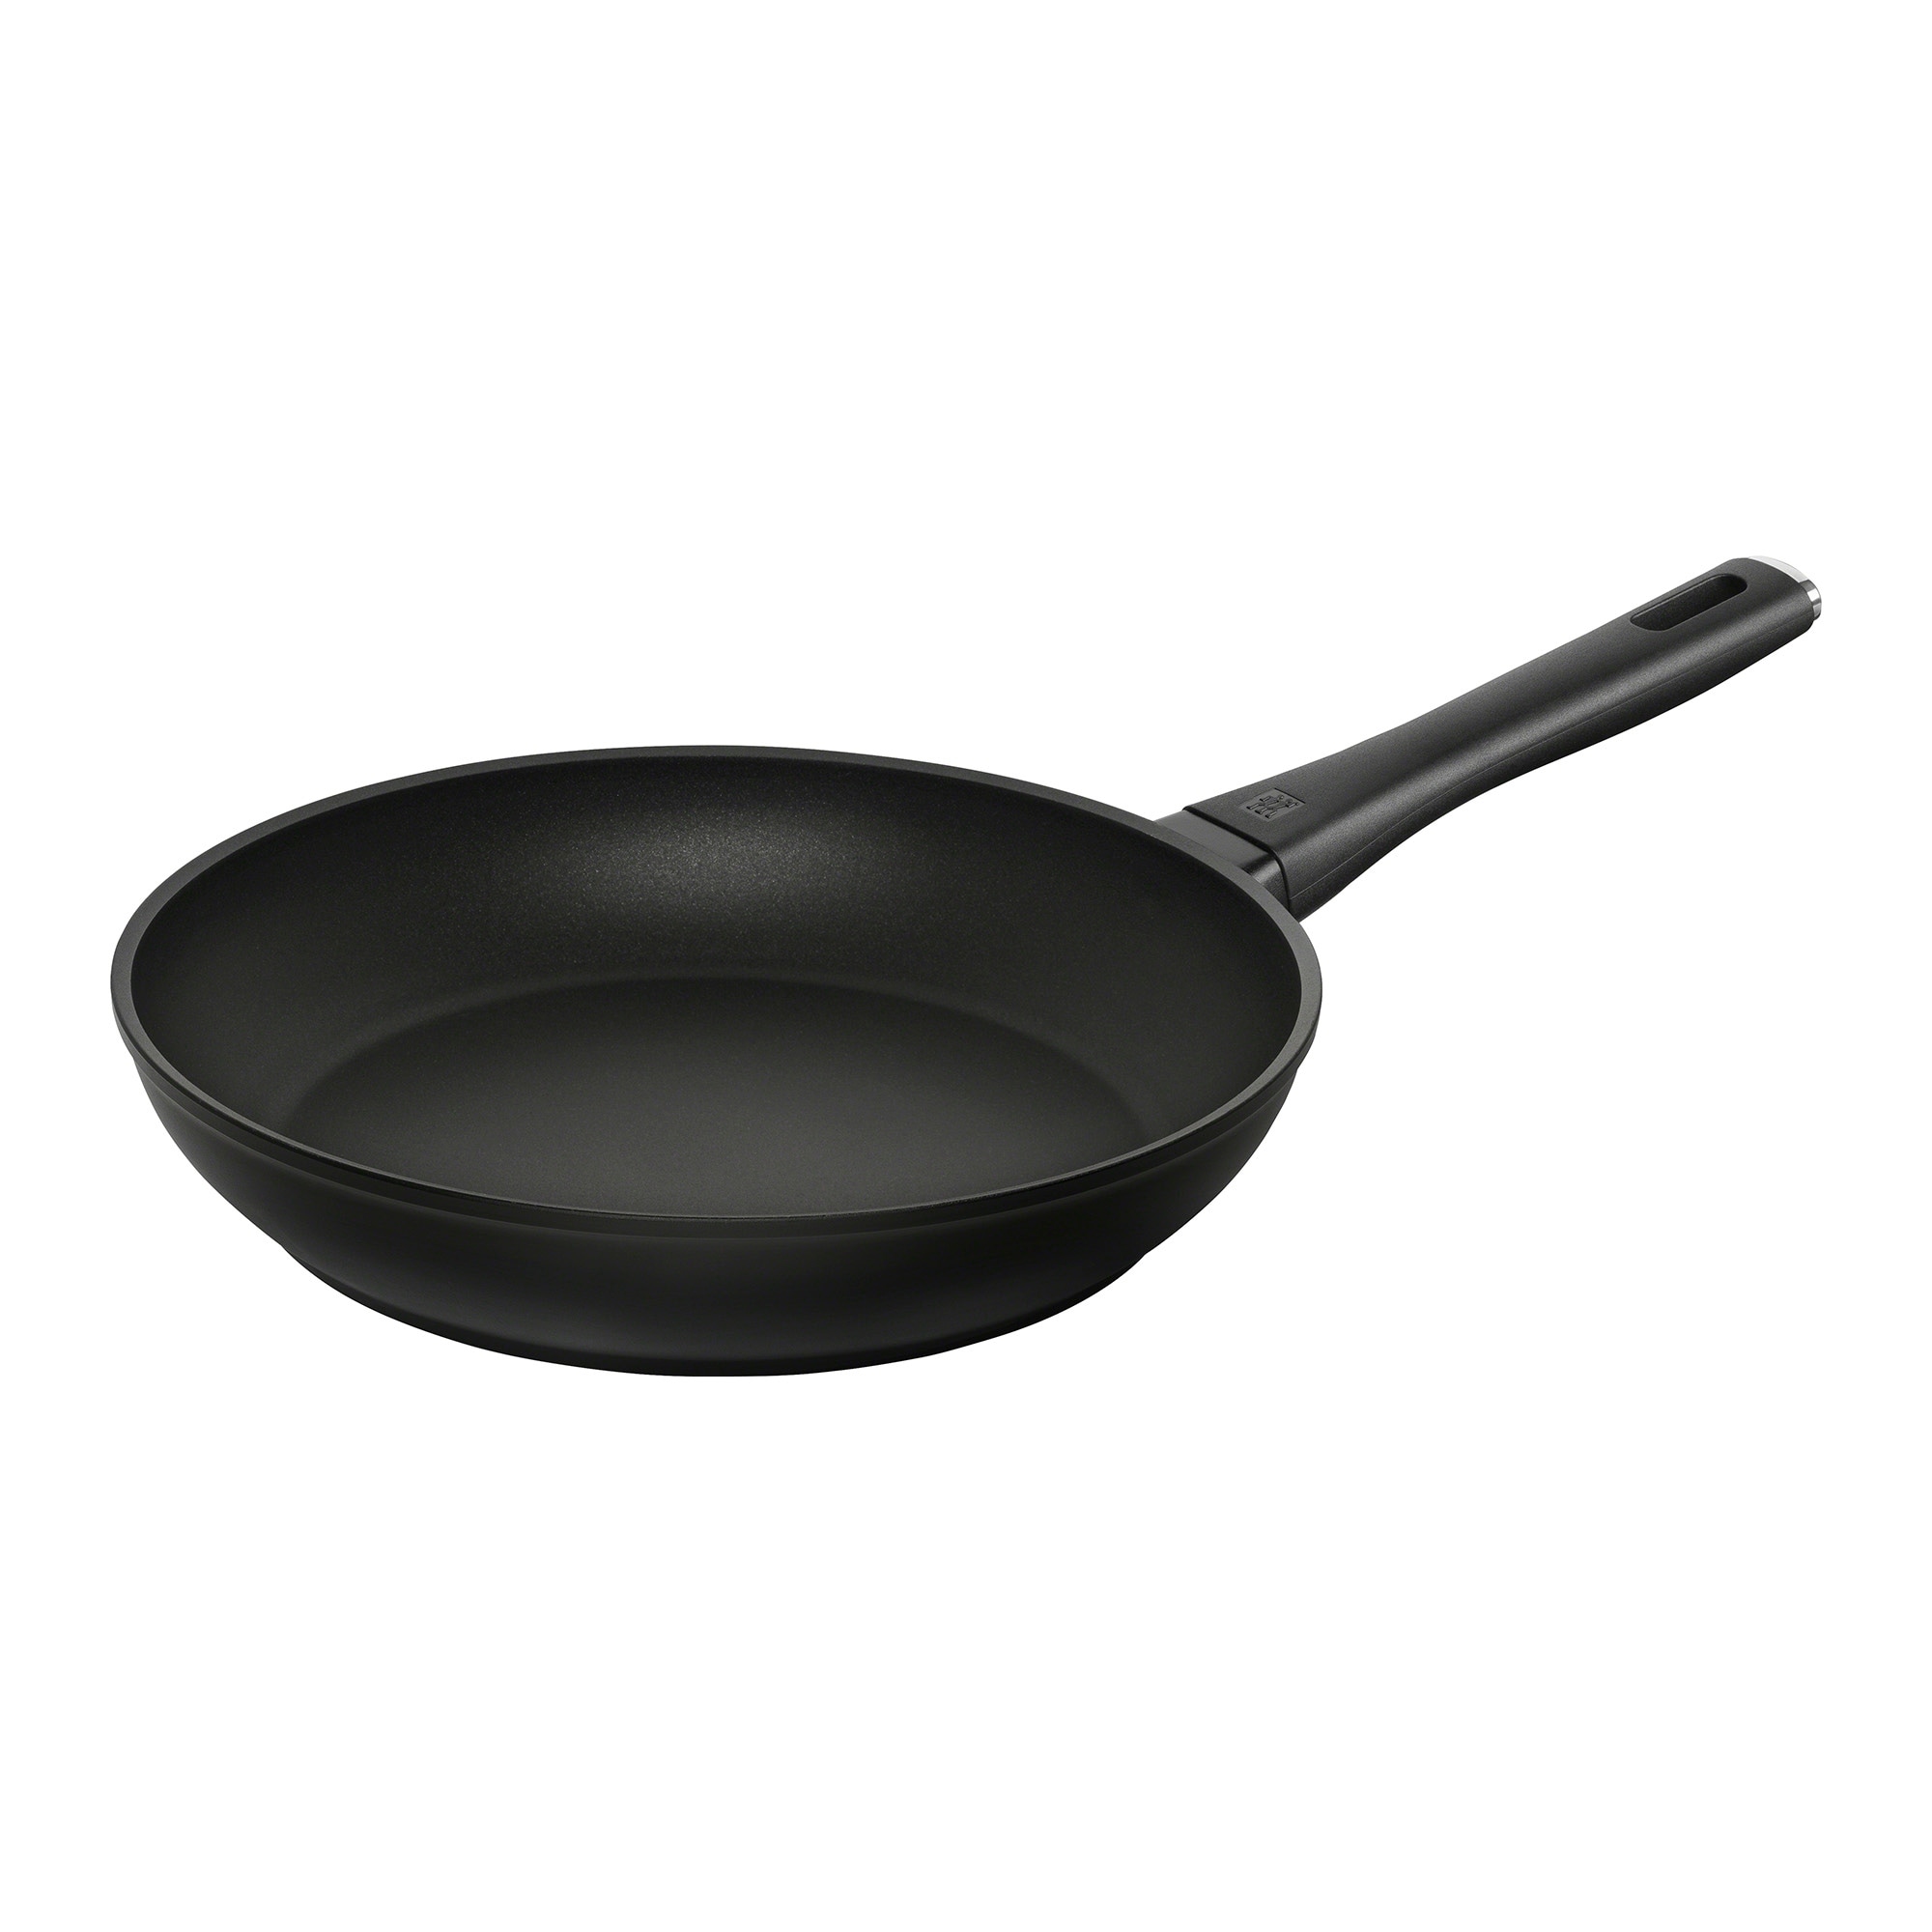 https://ak1.ostkcdn.com/images/products/is/images/direct/5e46c142ba2f5b083c066e4899162b714fbf755d/ZWILLING-Madura-Plus-Forged-Aluminum-Nonstick-Fry-Pan.jpg